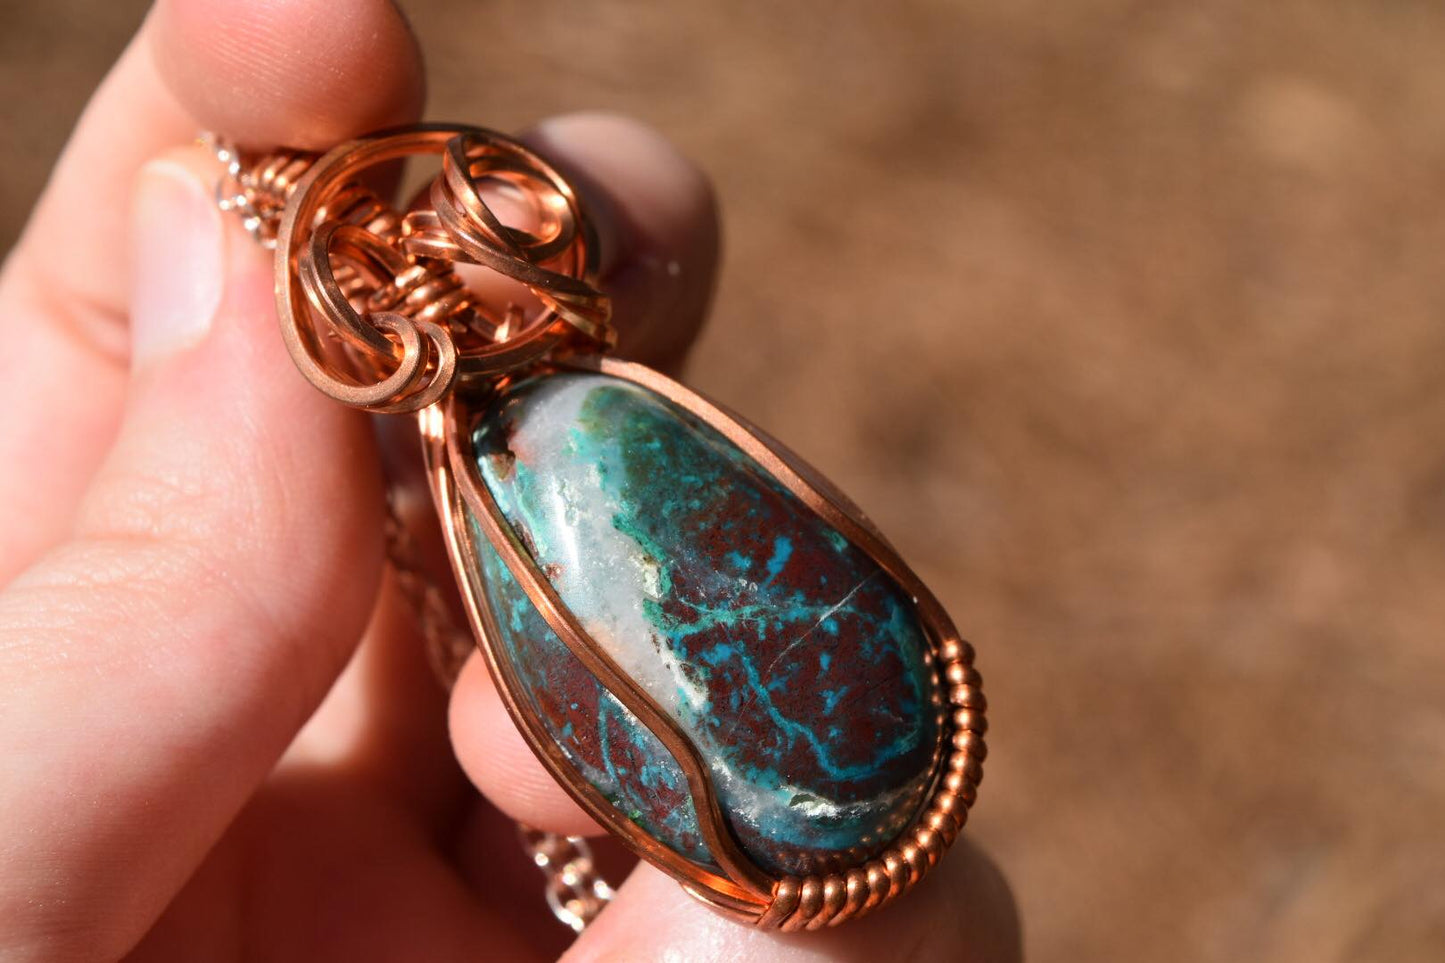 Chrysocolla Parrot Wing Wrapped in Copper Wire Pendant